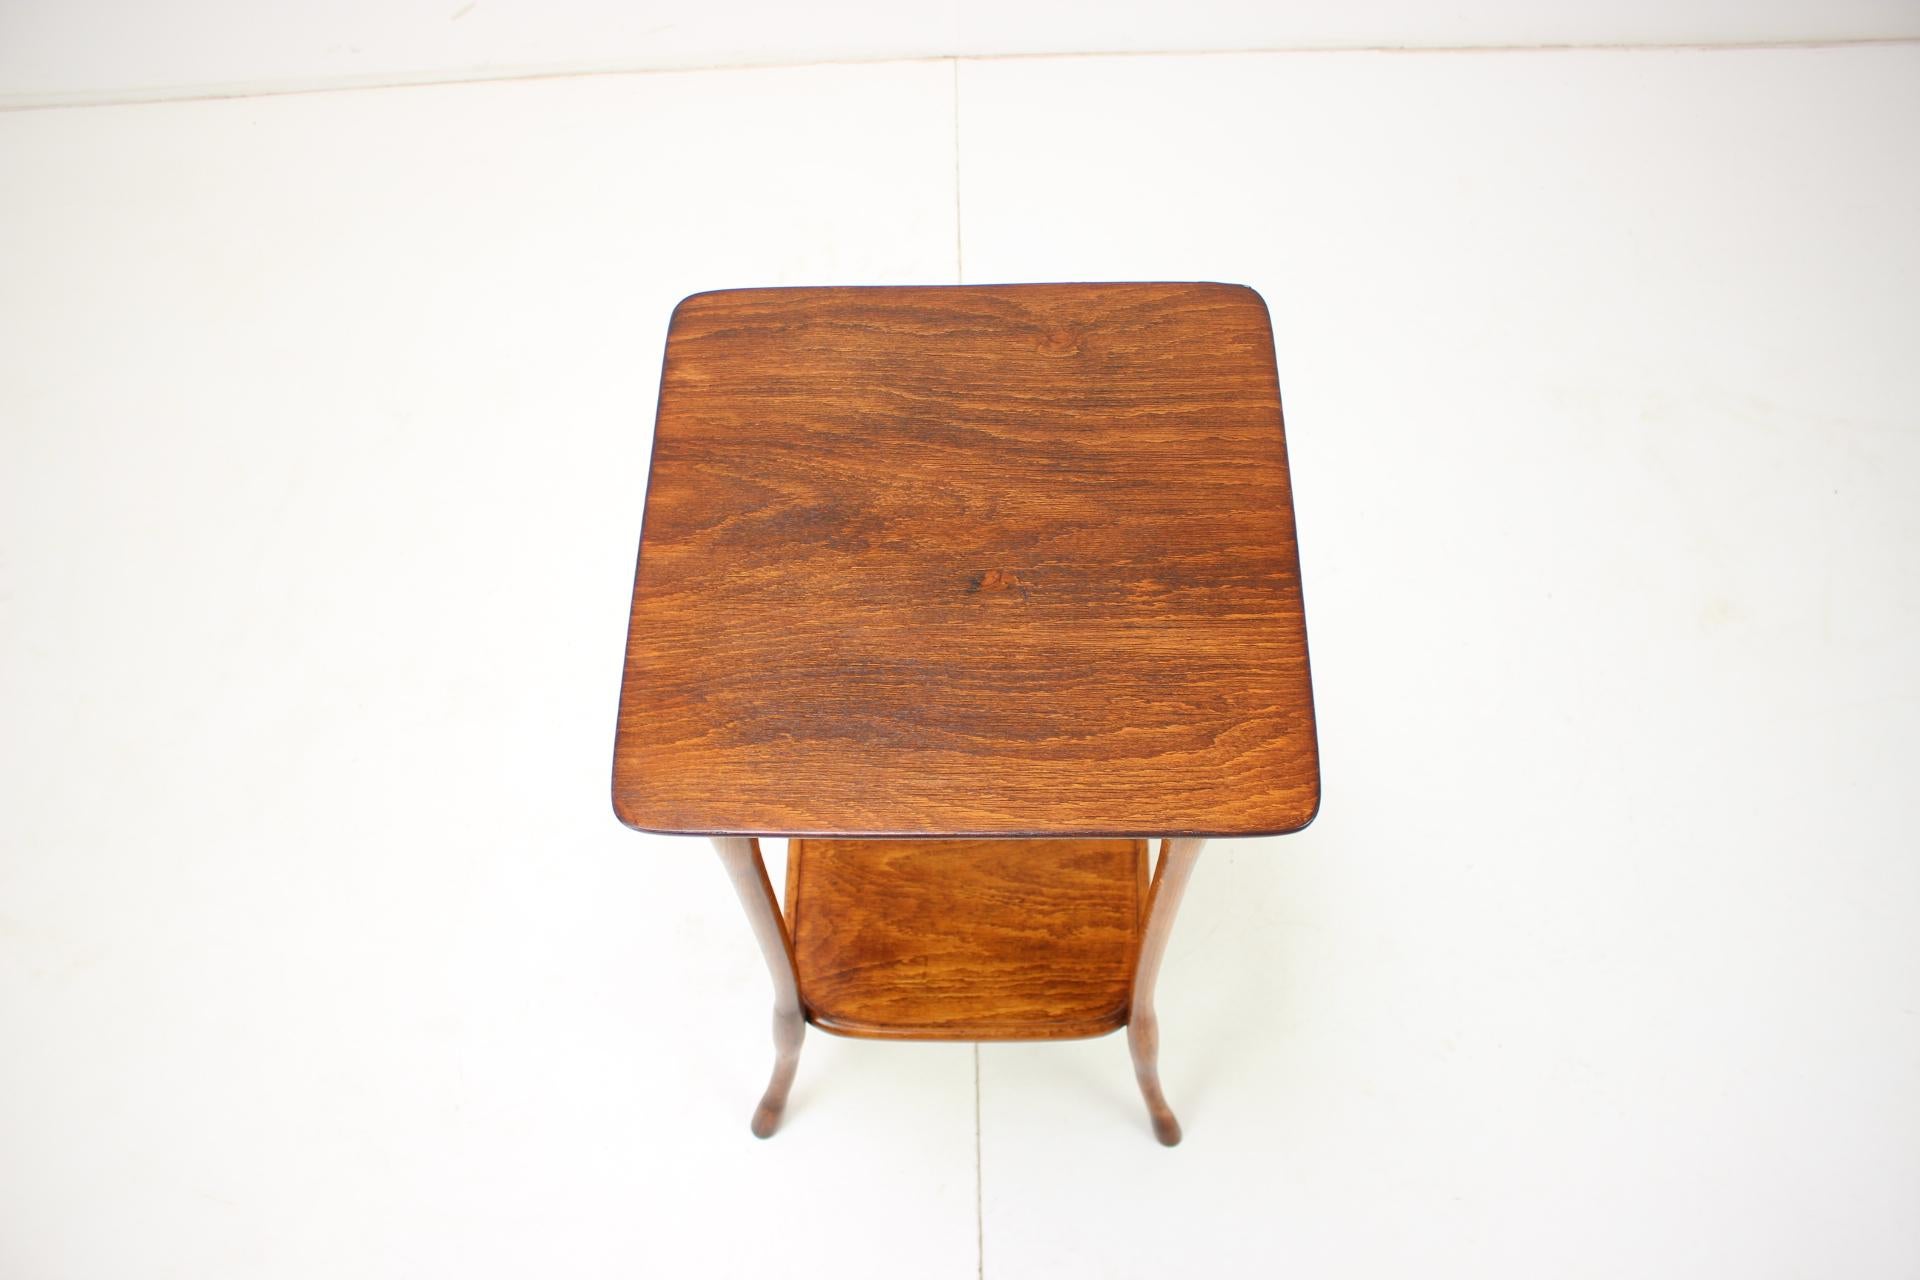 1920s side table